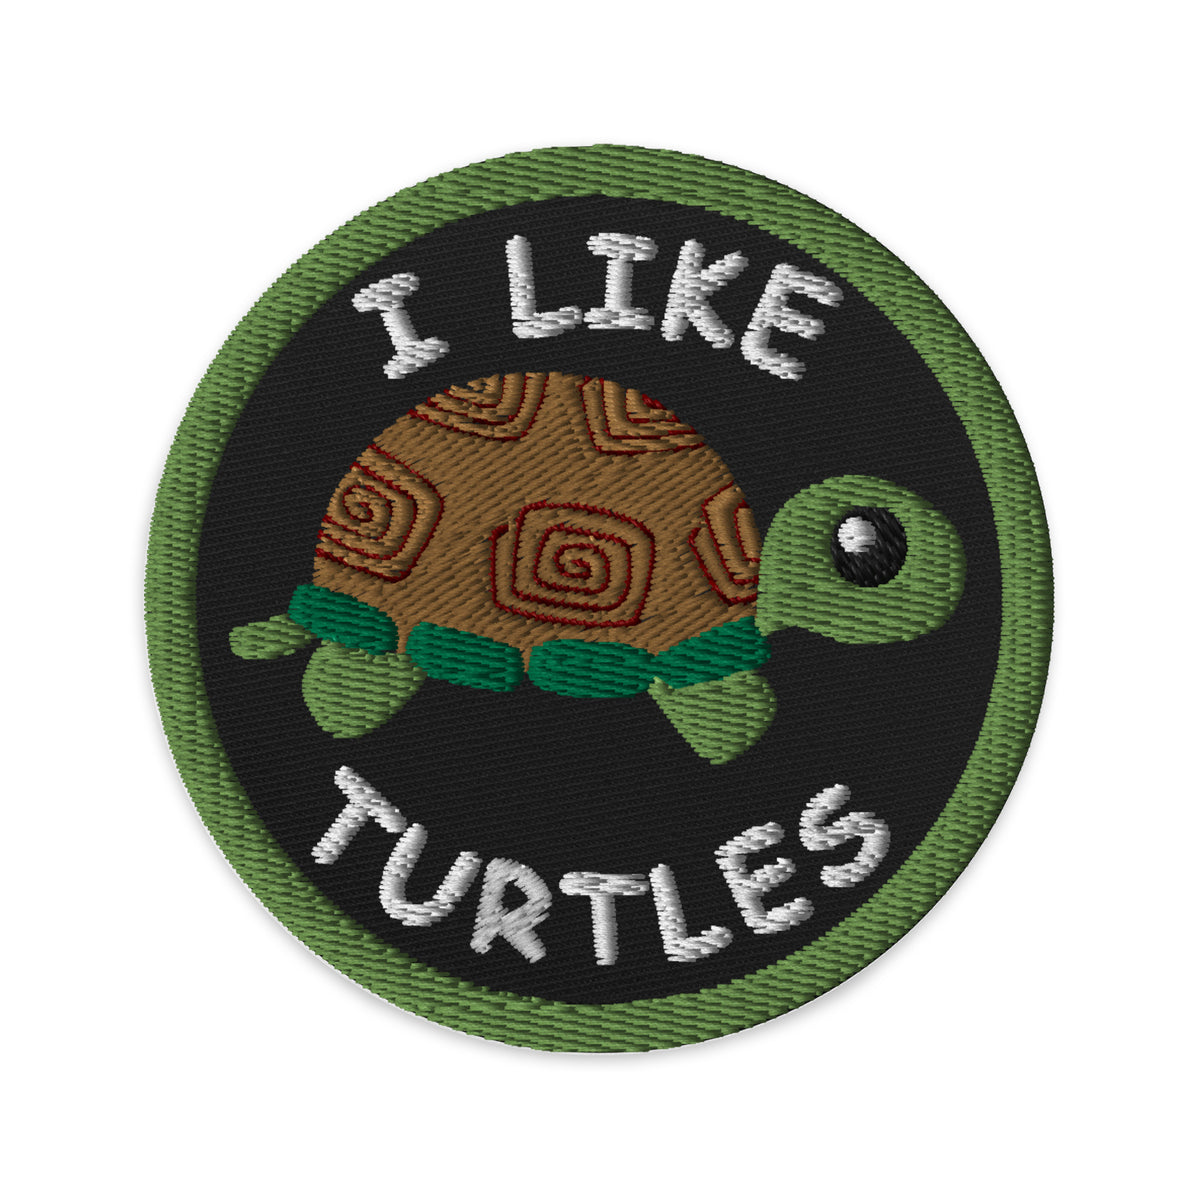 I Like Turtles Embroidered Morale Patch